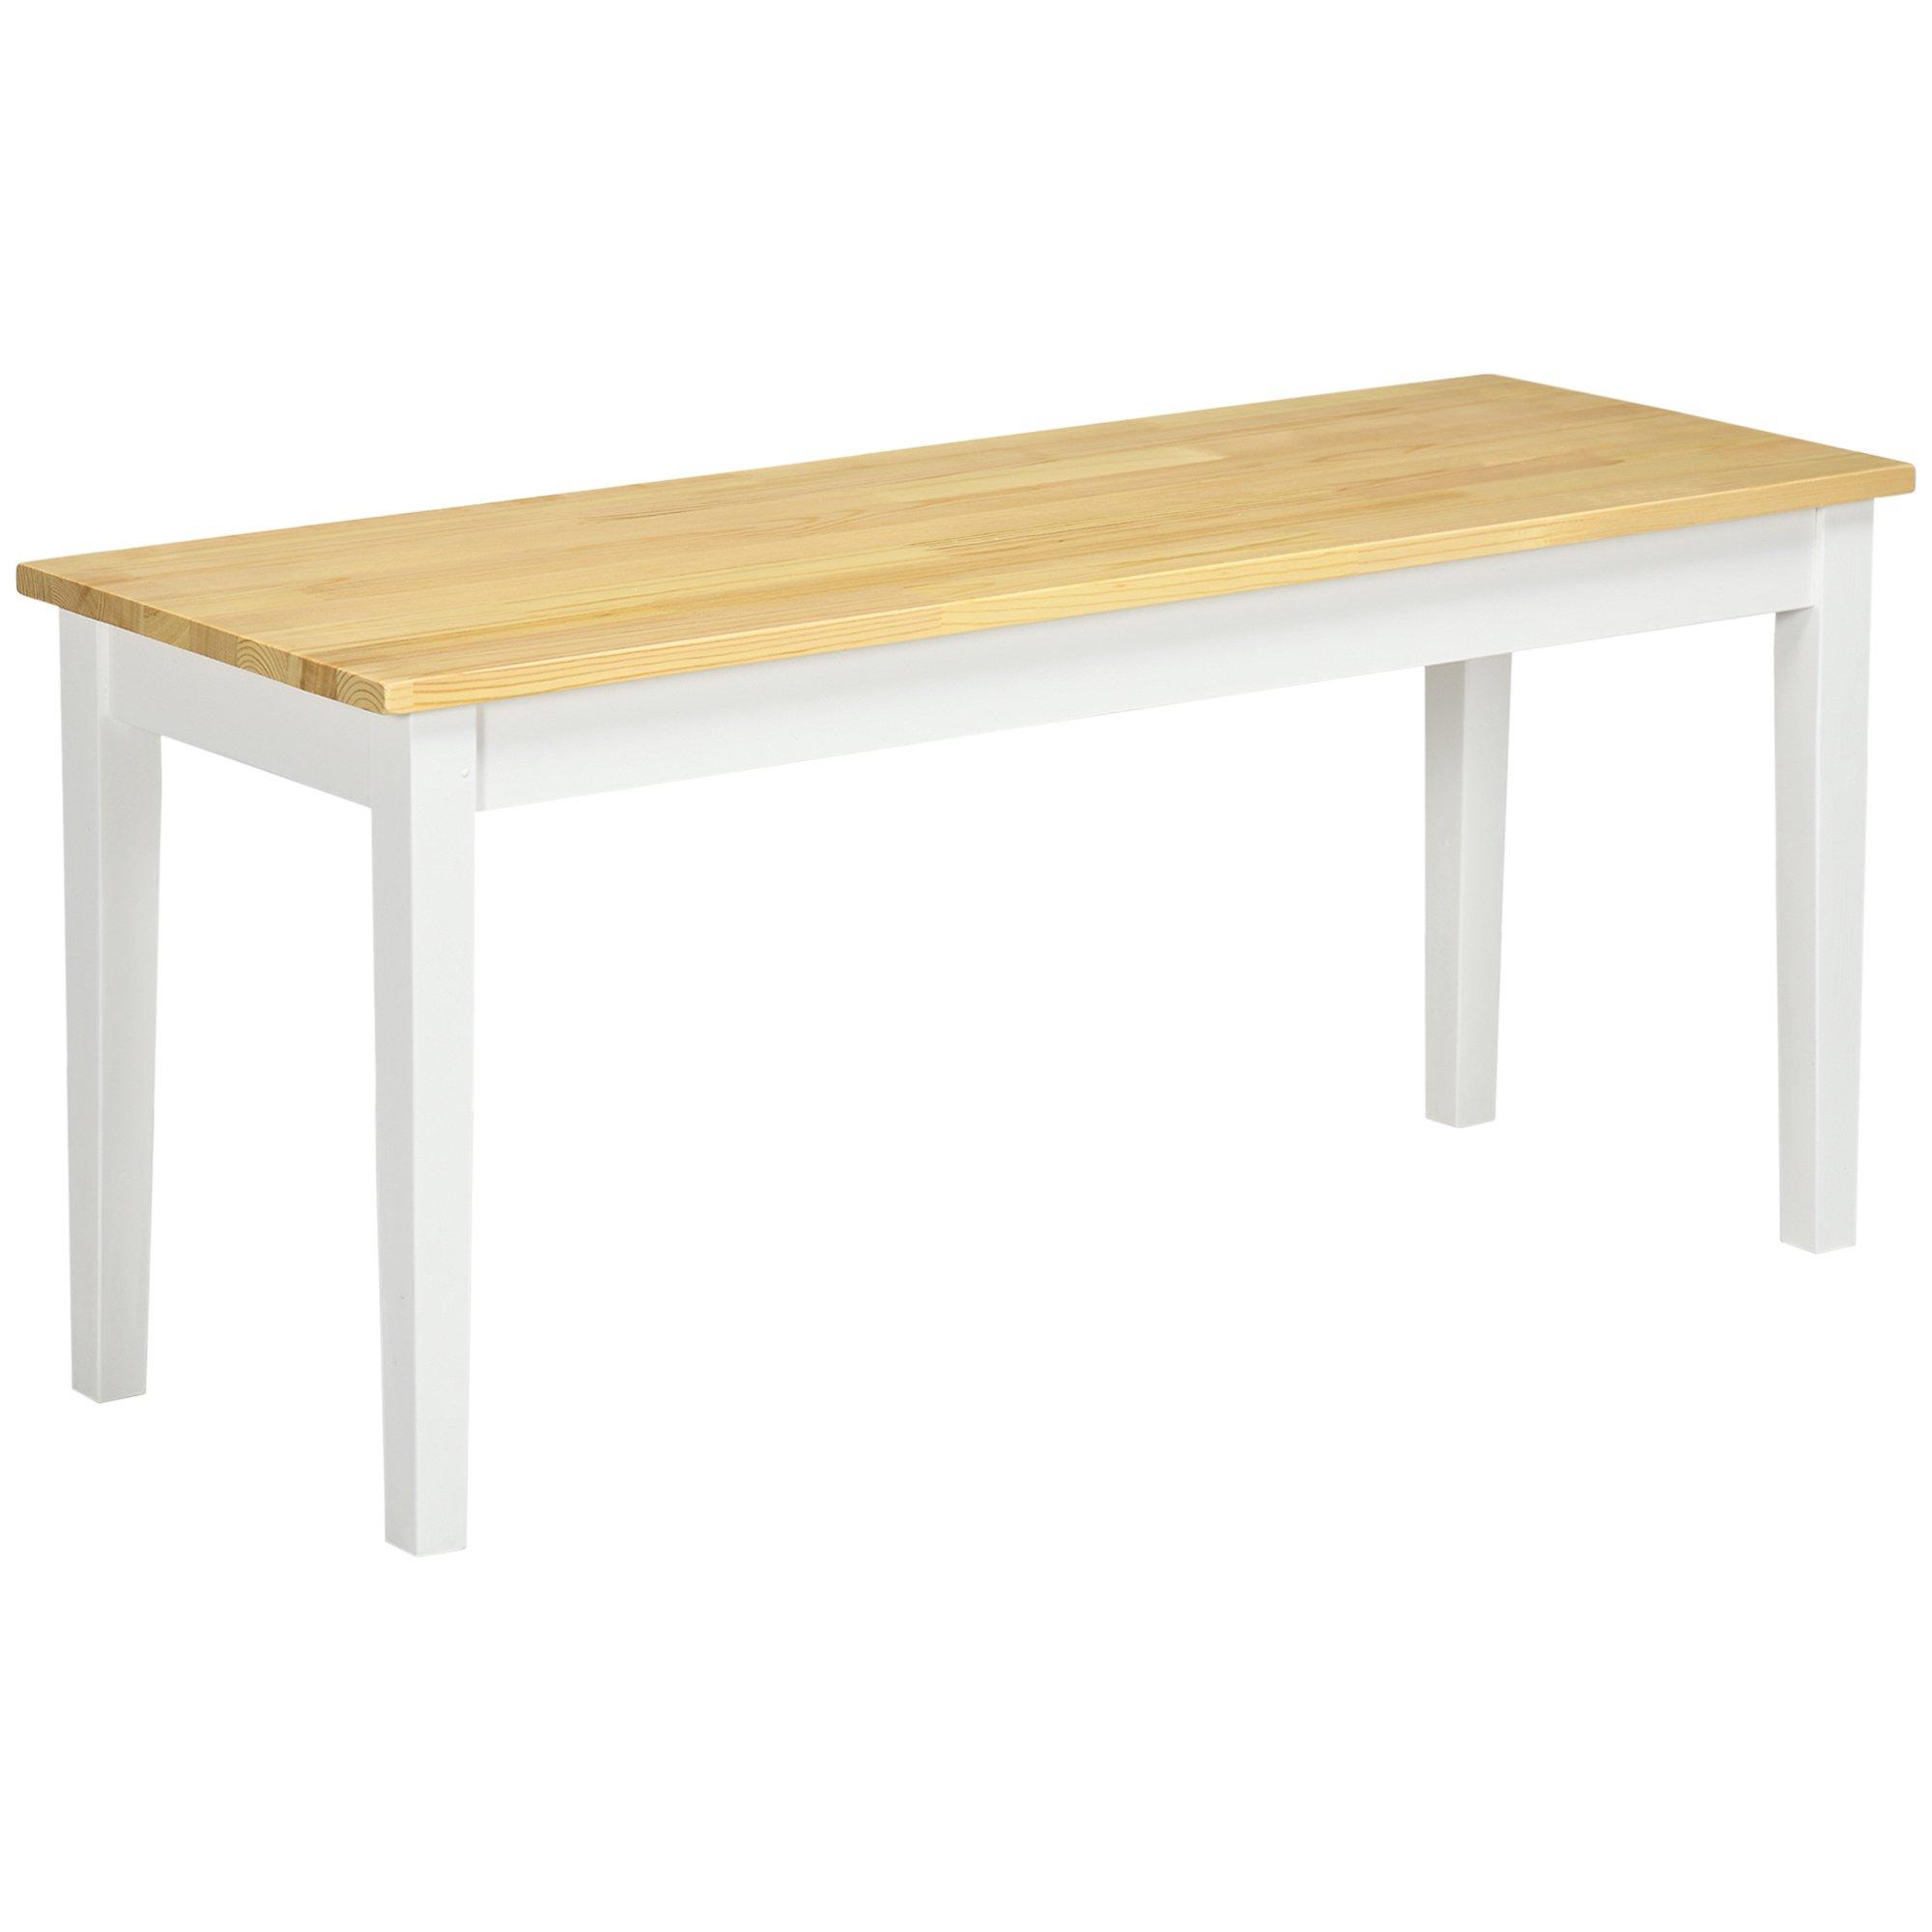 102 cm Wood Dining Bench Wooden Bench for for Kitchen